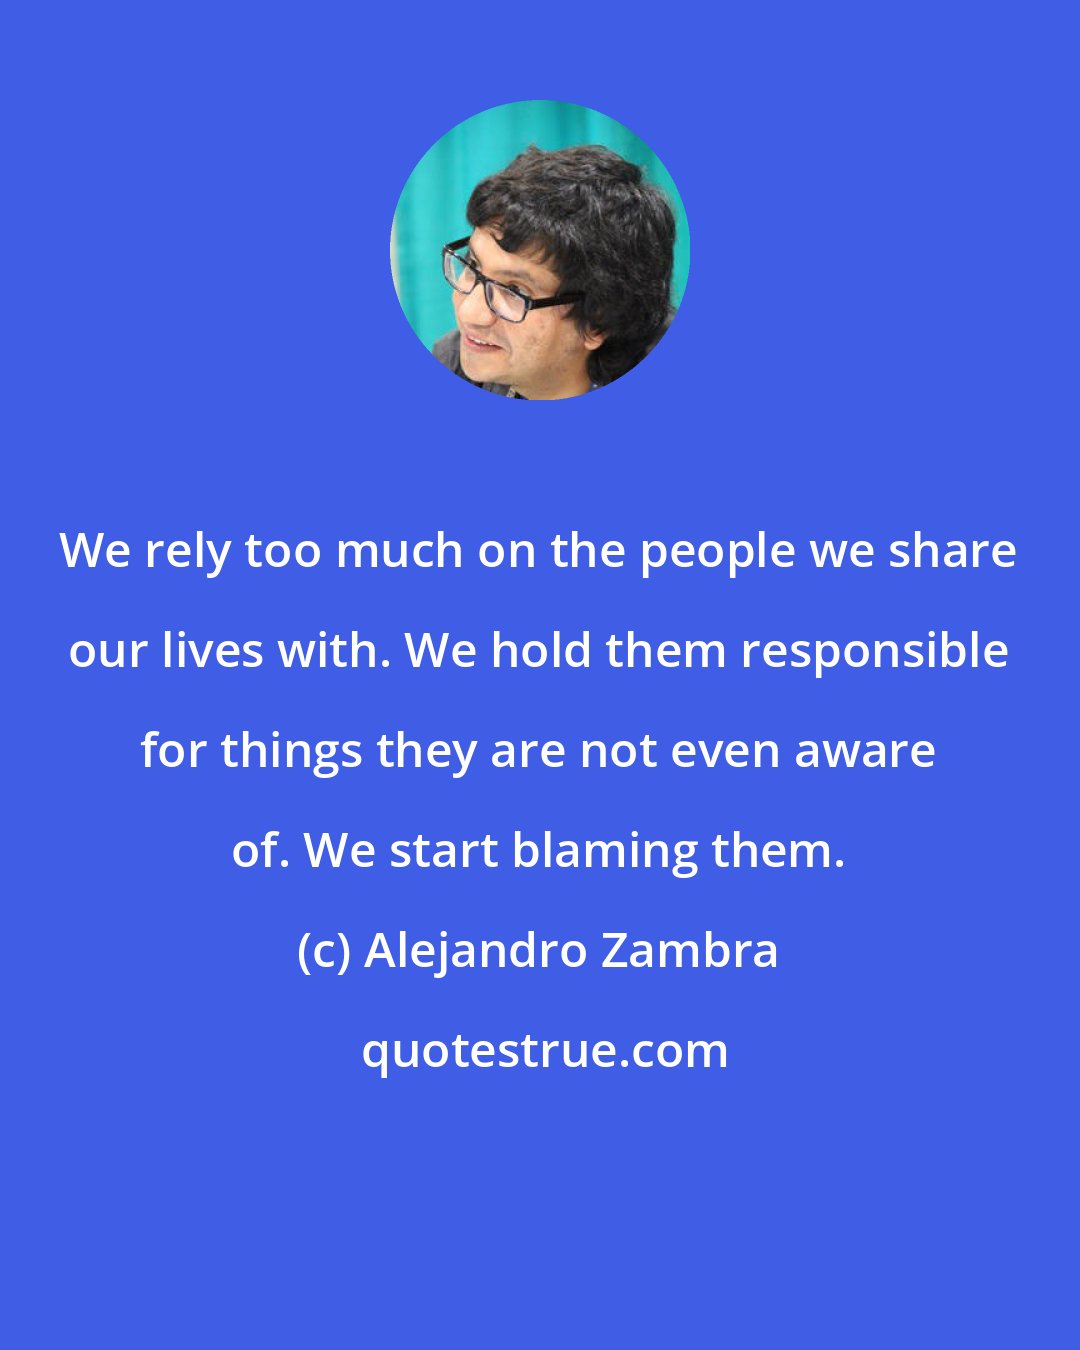 Alejandro Zambra: We rely too much on the people we share our lives with. We hold them responsible for things they are not even aware of. We start blaming them.